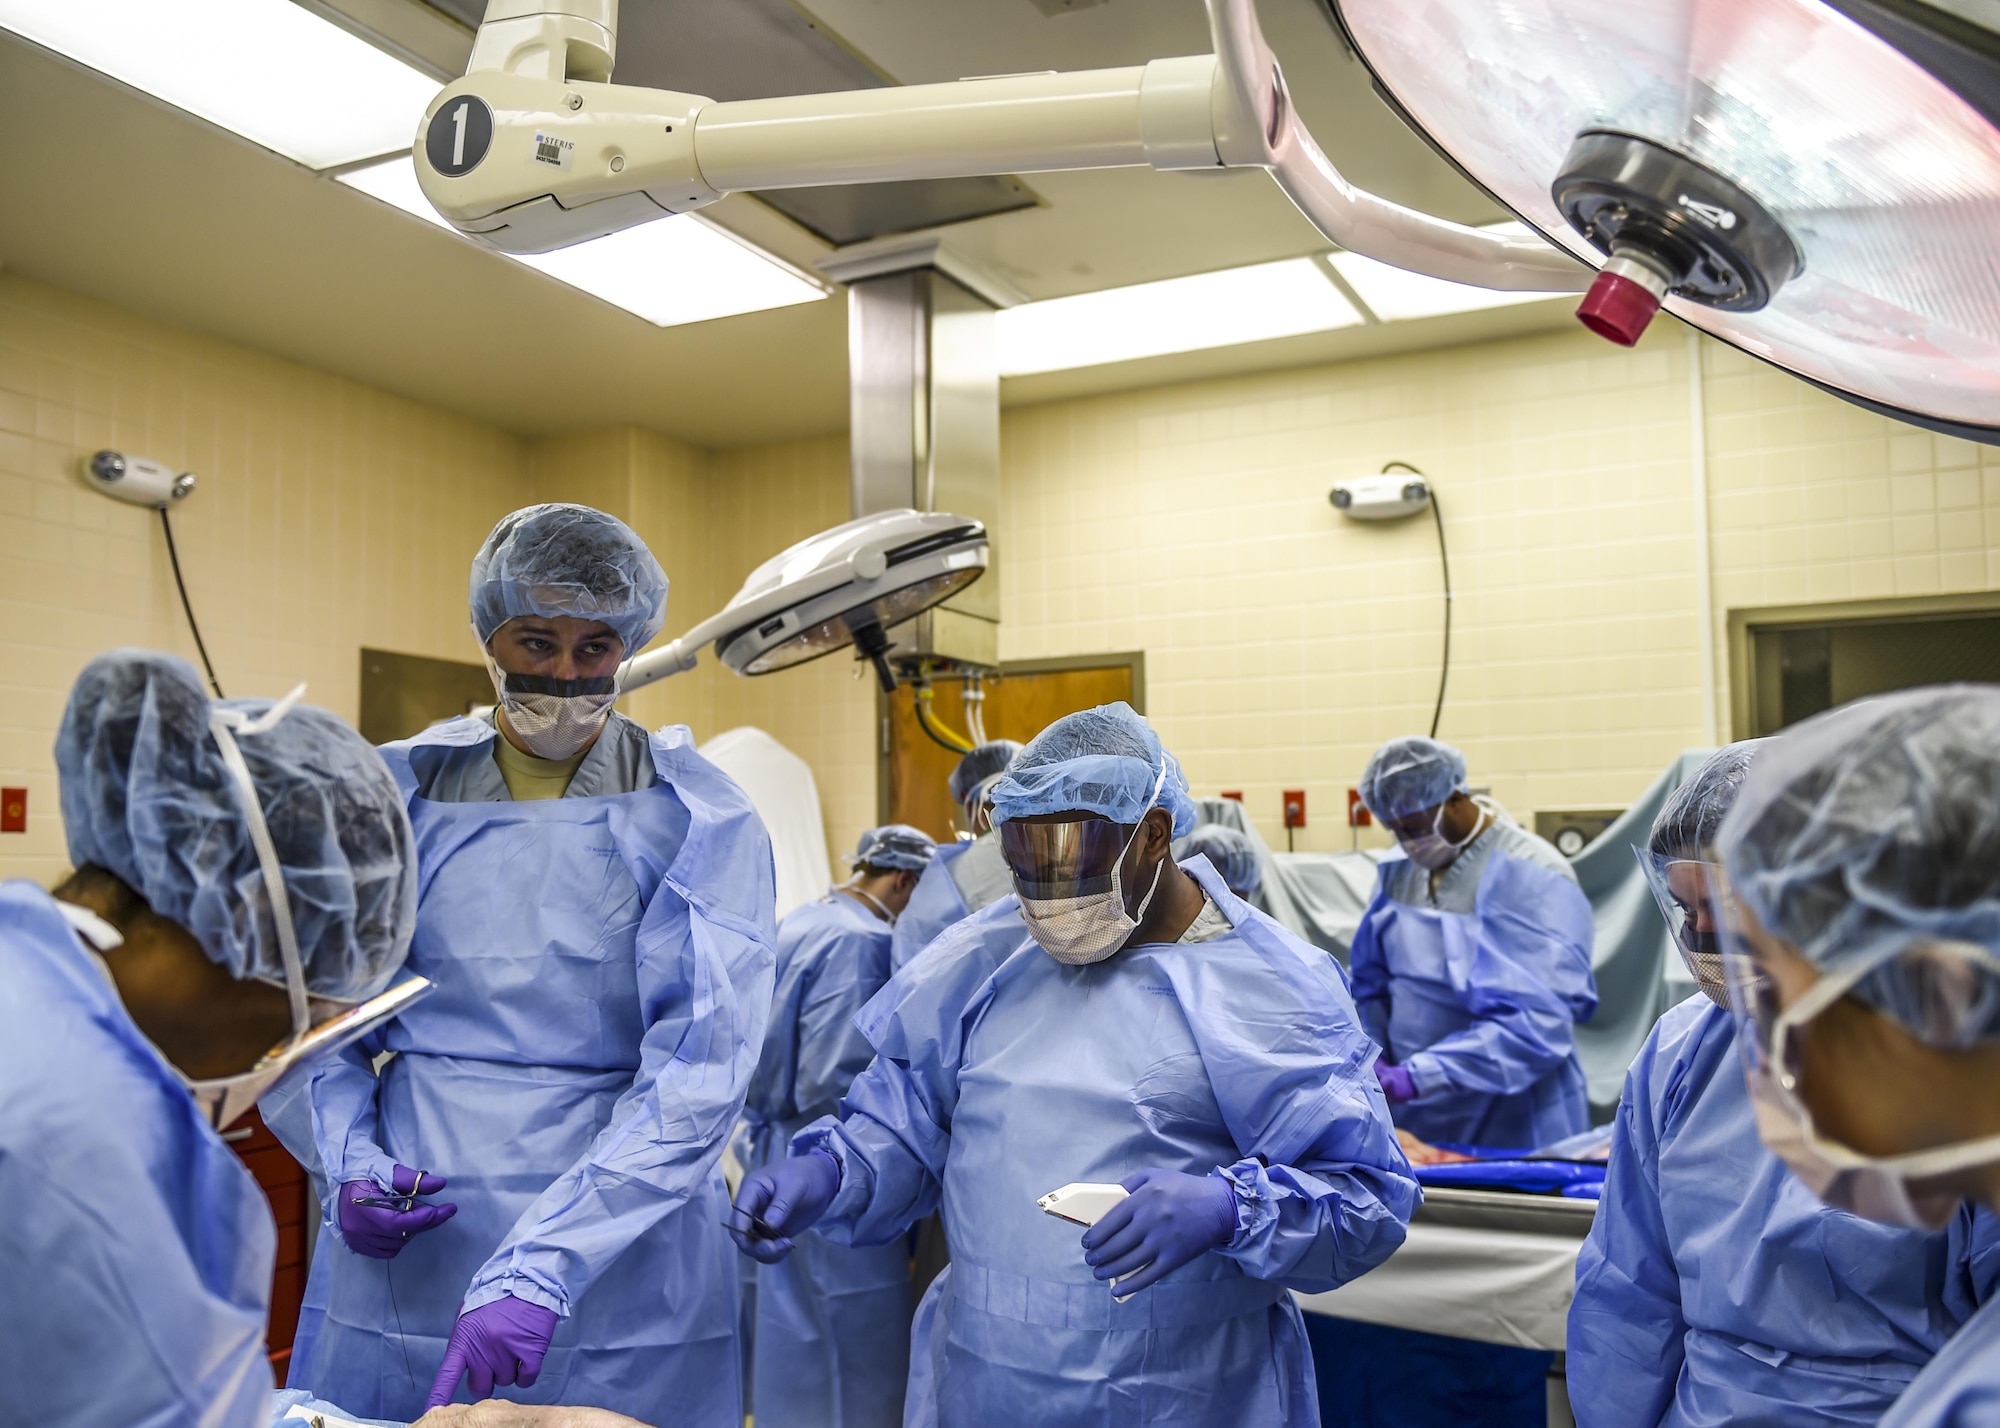 Medical technicians from the 59th Medical Wing and 433rd Reserve unit learn how to identify and treat multi-system injuries at the Sustainment for Trauma and Resuscitation Skills Program anatomy laboratory, April 21, 2016 at the Wilford Hall Ambulatory Surgical Center on Joint Base San Antonio-Lackland, Texas. (U.S. Air Force photo/Staff Sgt. Michael Ellis)